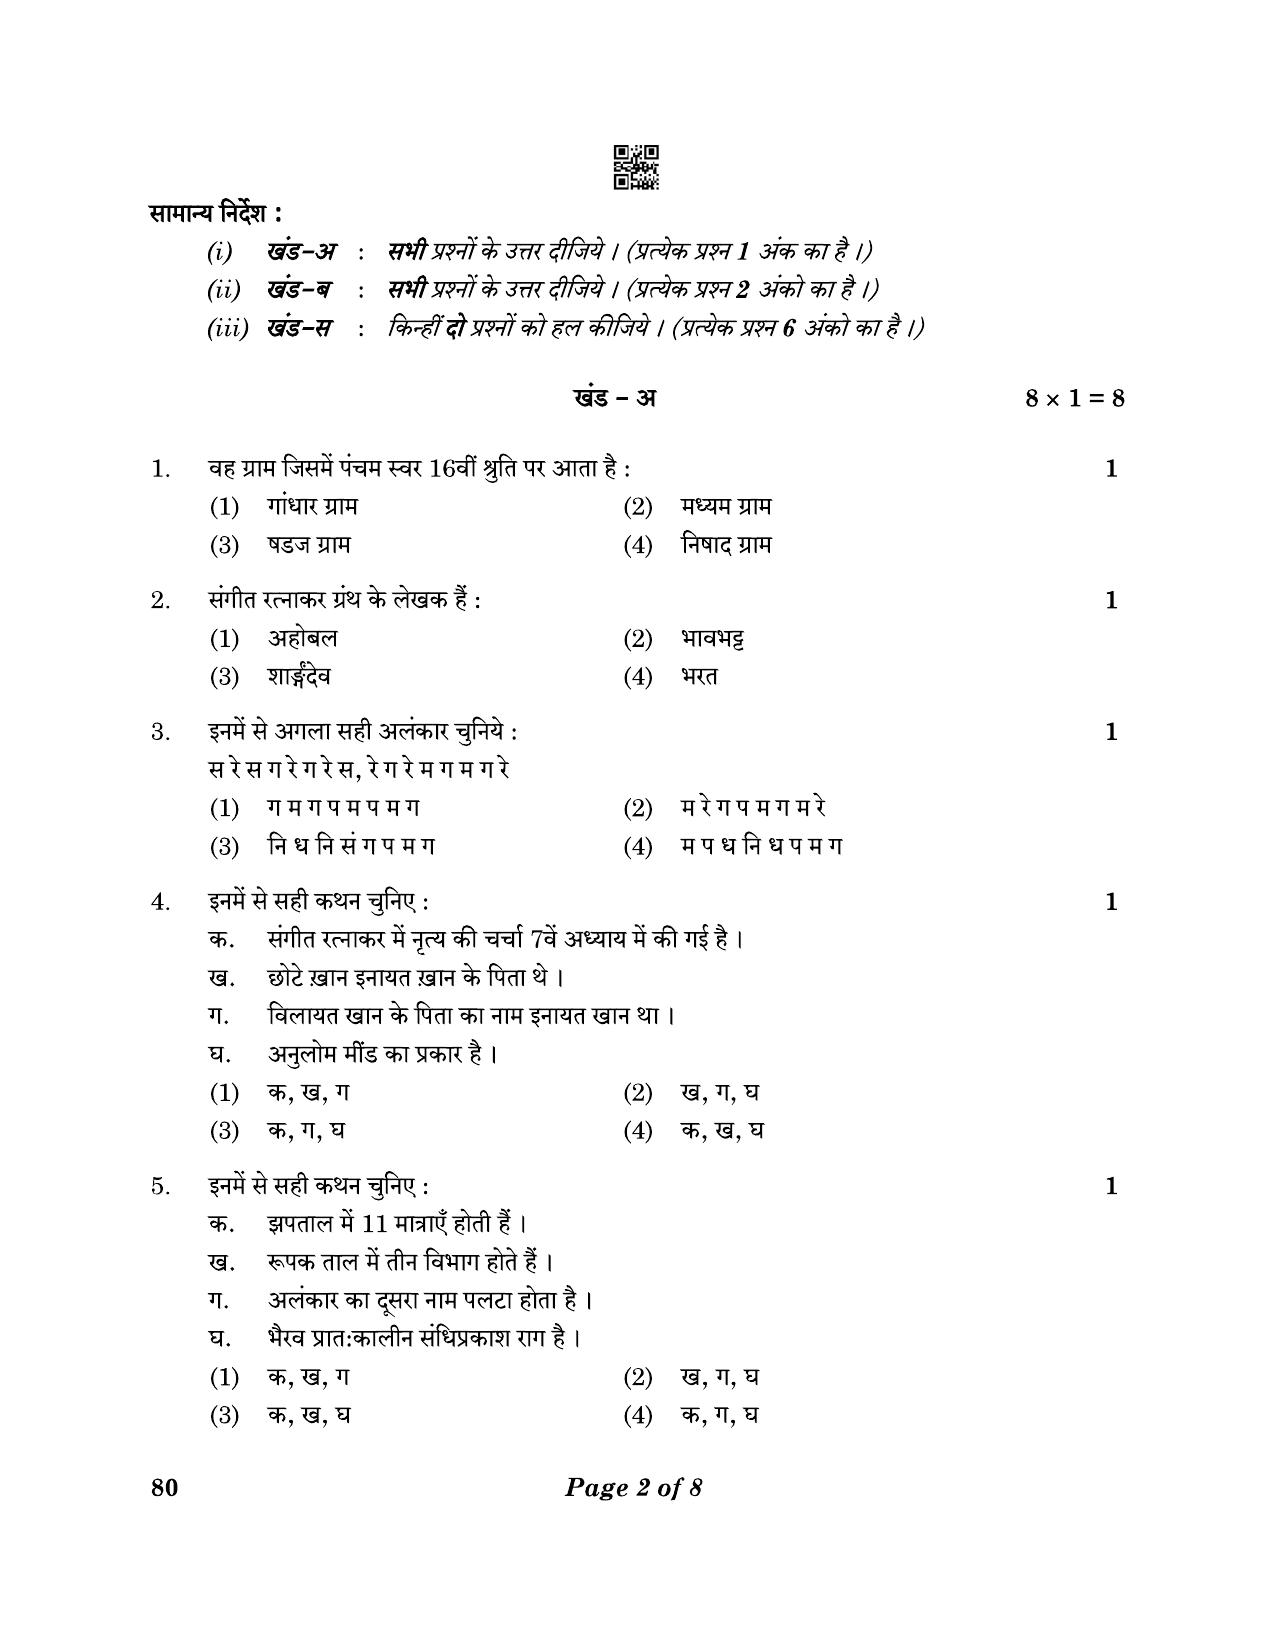 CBSE Class 12 79_Music Hindustani Mel. Ins. 2023 Question Paper - Page 2